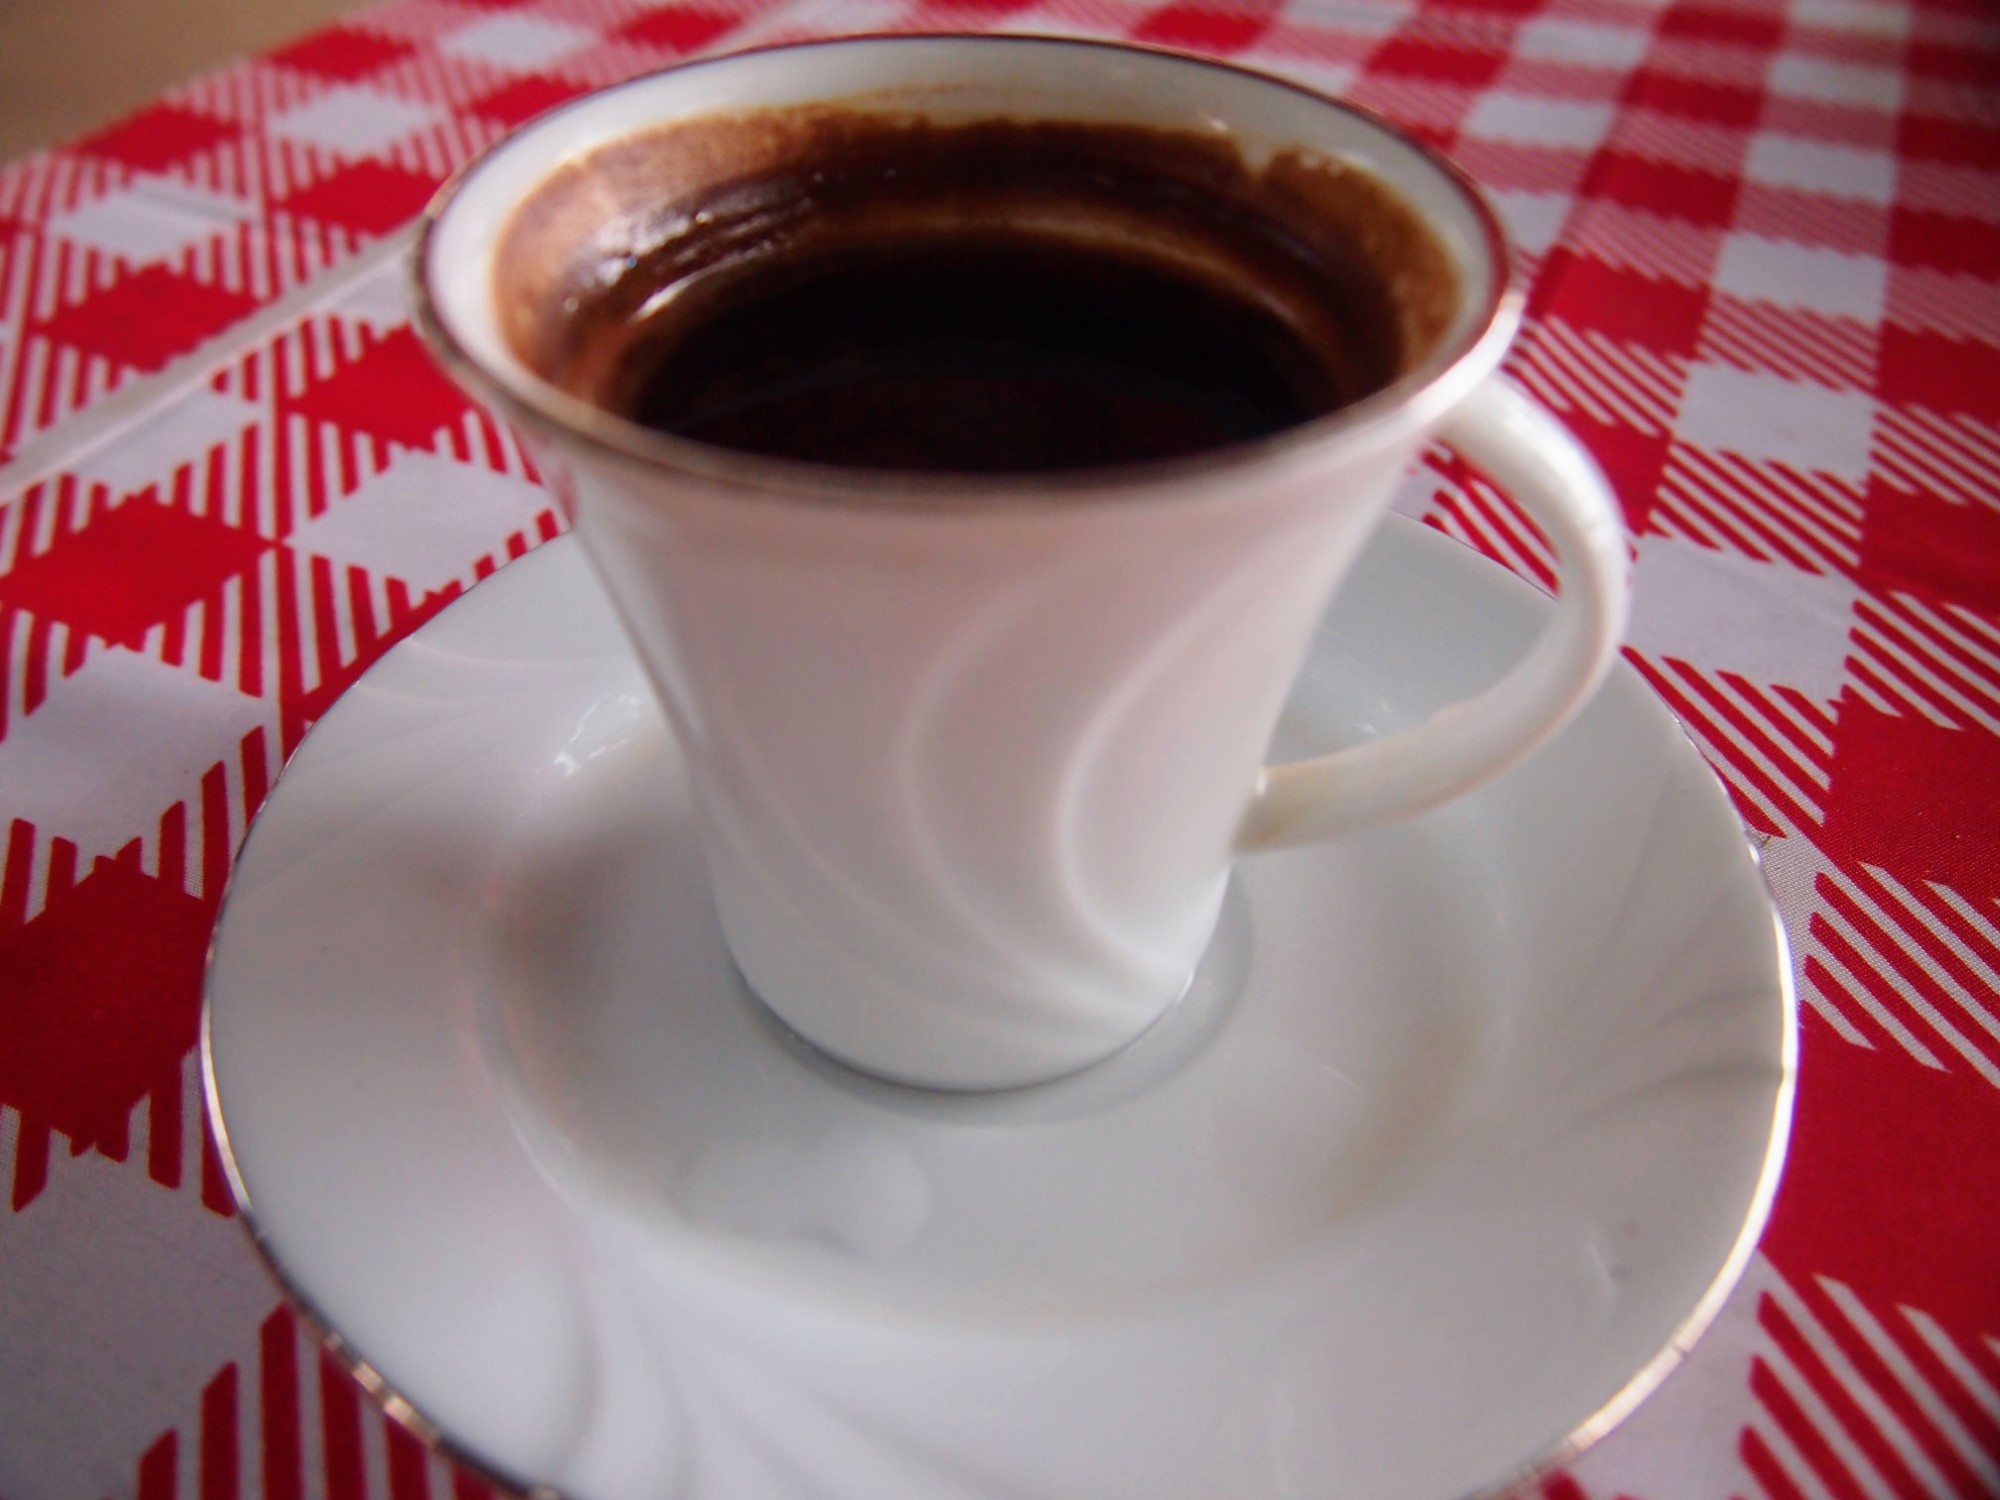 Small cup of Turkish coffee on a red checked tablecloth